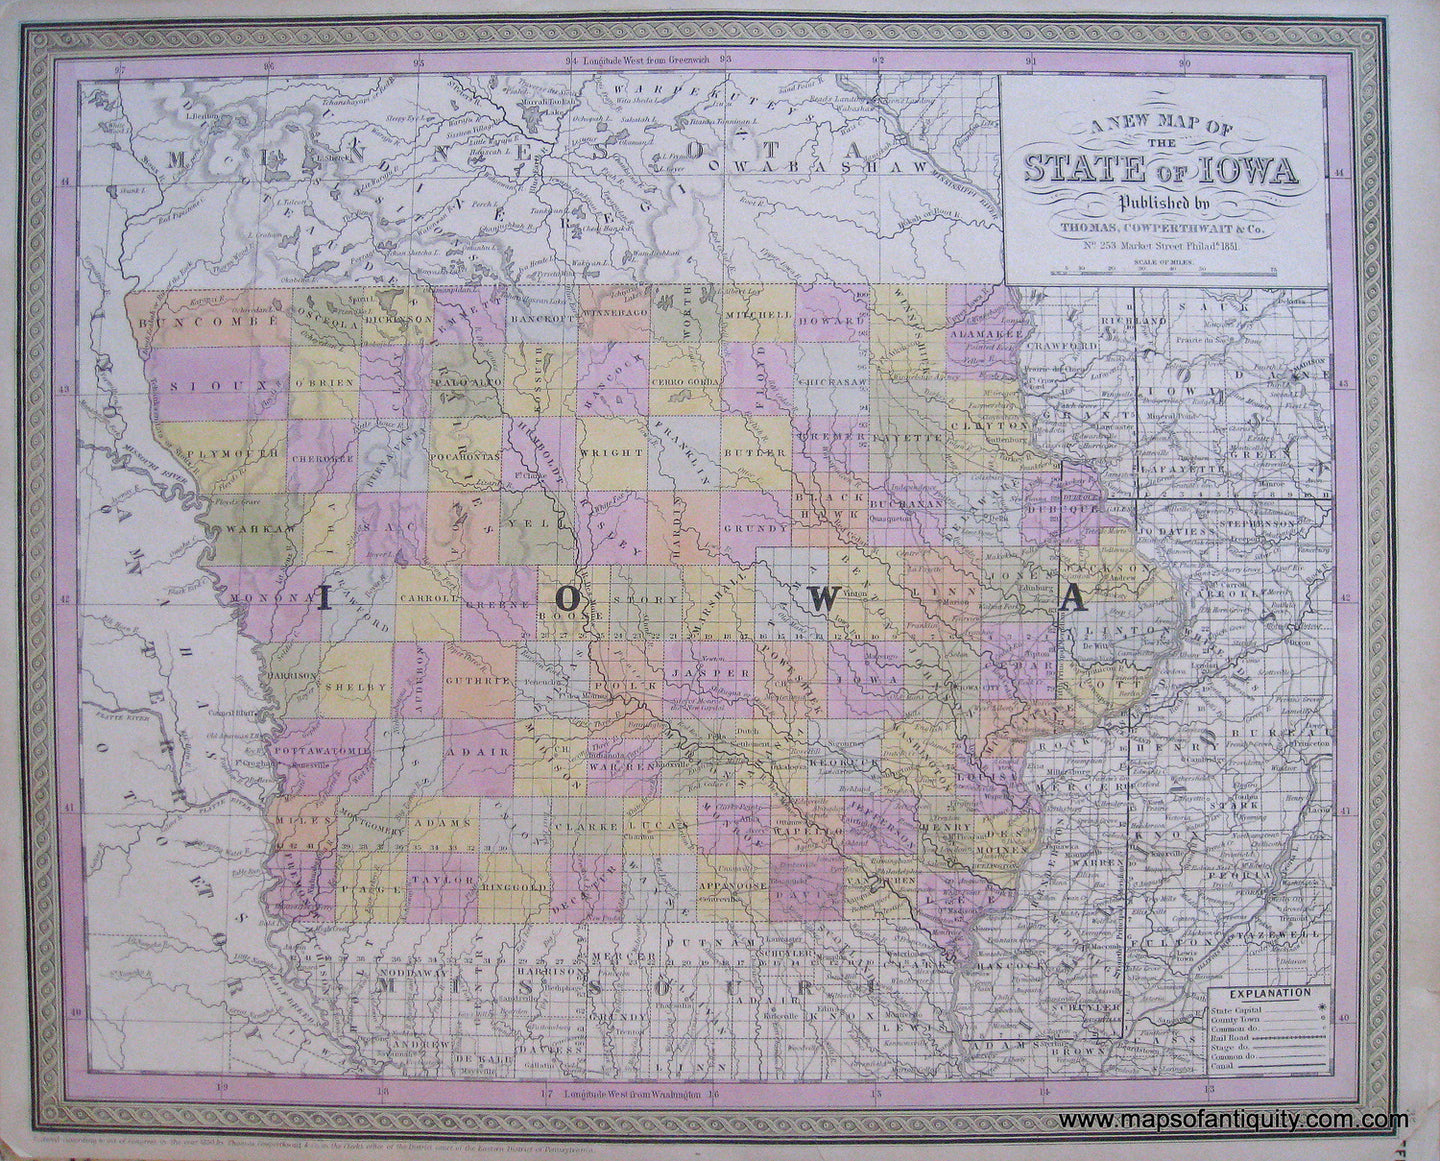 Antique-Hand-Colored-Map-A-New-Map-of-the-State-of-Iowa.-United-States-Midwest-1851-Mitchell/Cowperthwait-Desilver-&-Butler-Maps-Of-Antiquity